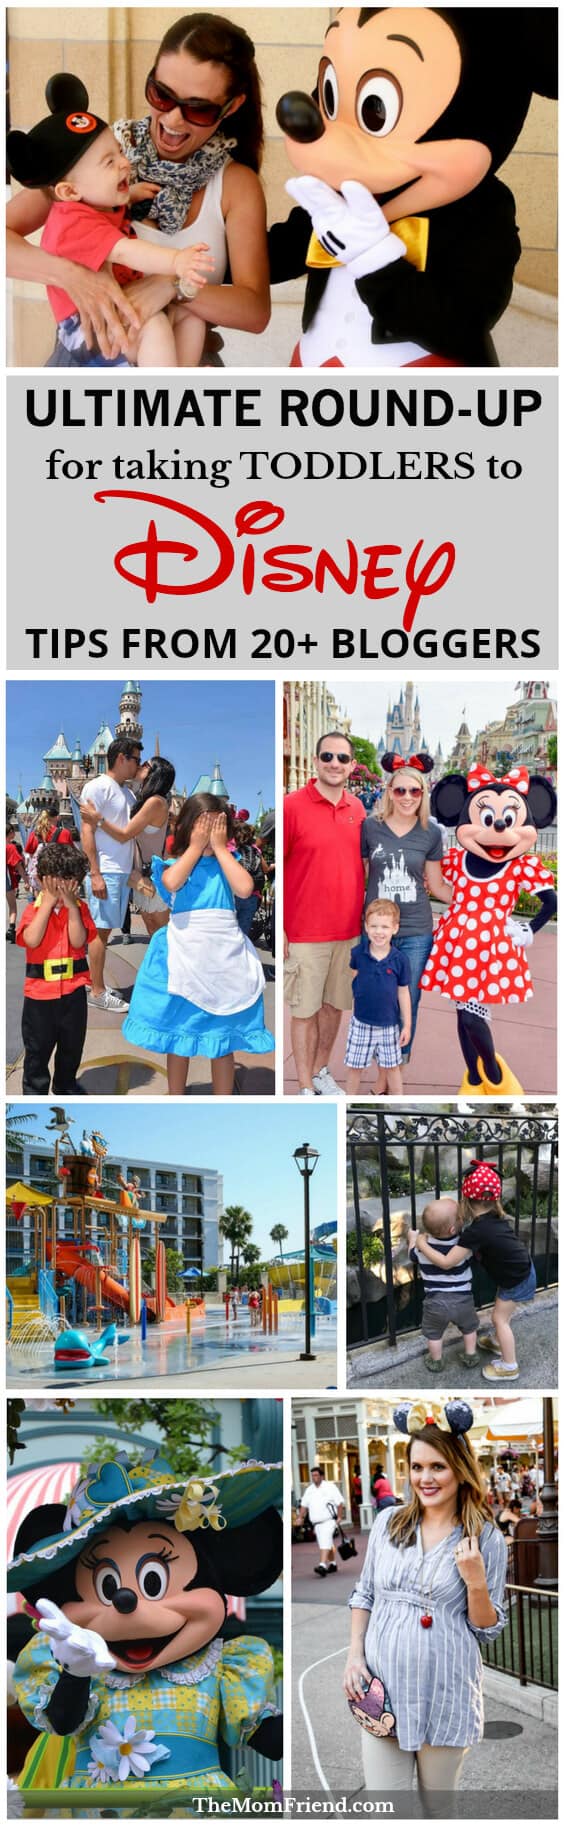 Planning a trip to Disney? Check out this one-stop resource with all the best tips for doing Disney with a toddler from top bloggers. | Disney with kids | Disneyland tips | Disneyland secrets | Disneyland outfits | Disneyland dining | packing for Disney | Disneyland pictures | travel with kids